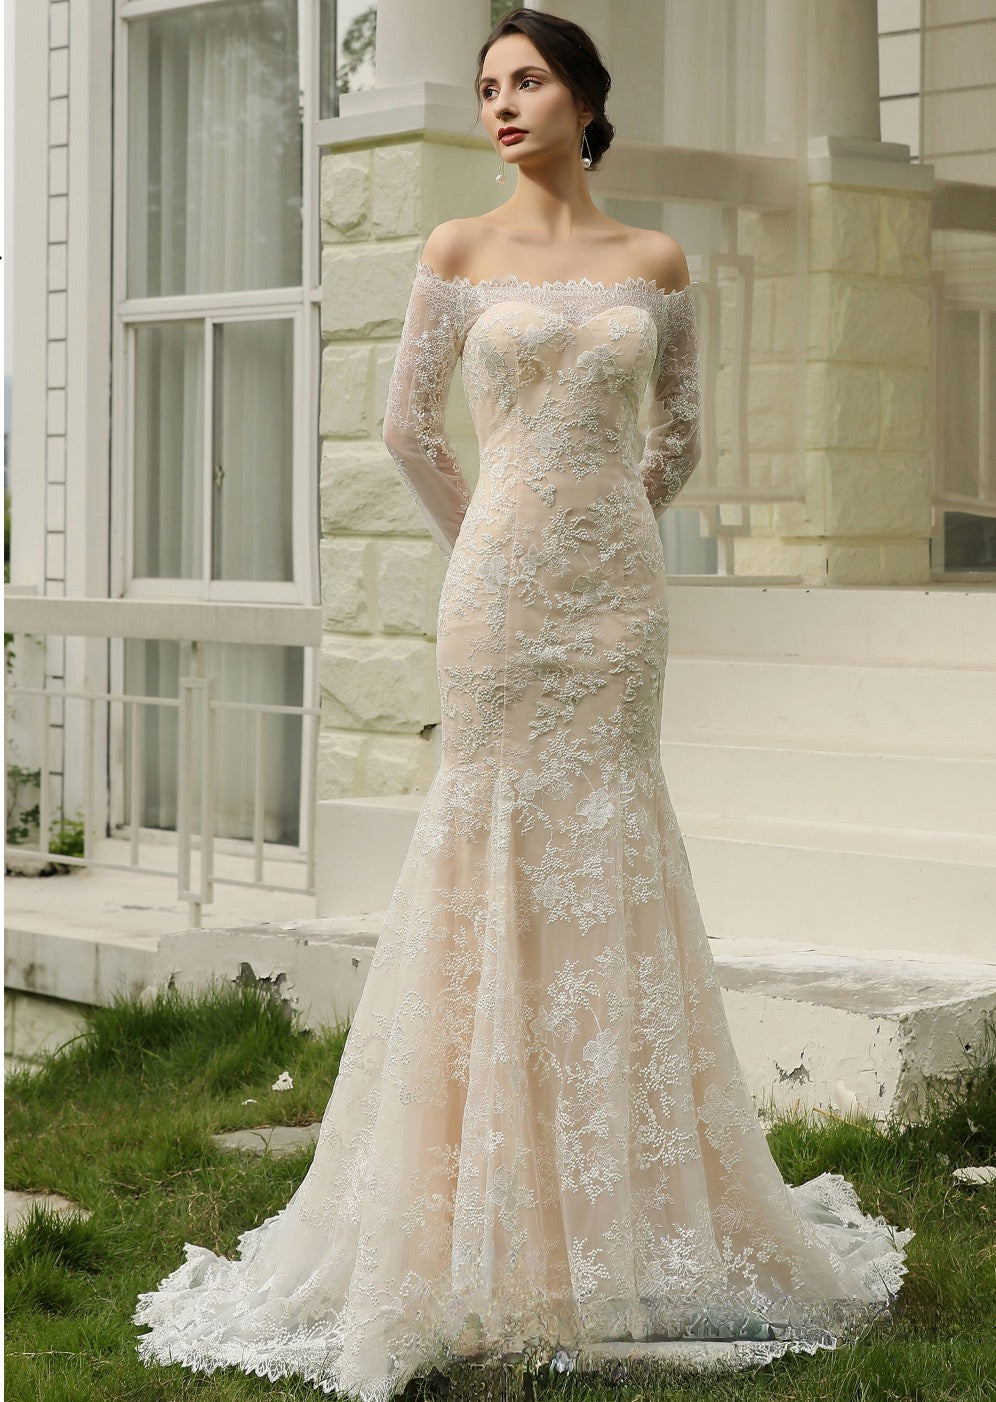 Off-the-Shoulder Sheath Wedding Dress with Luxury Illusion Lace